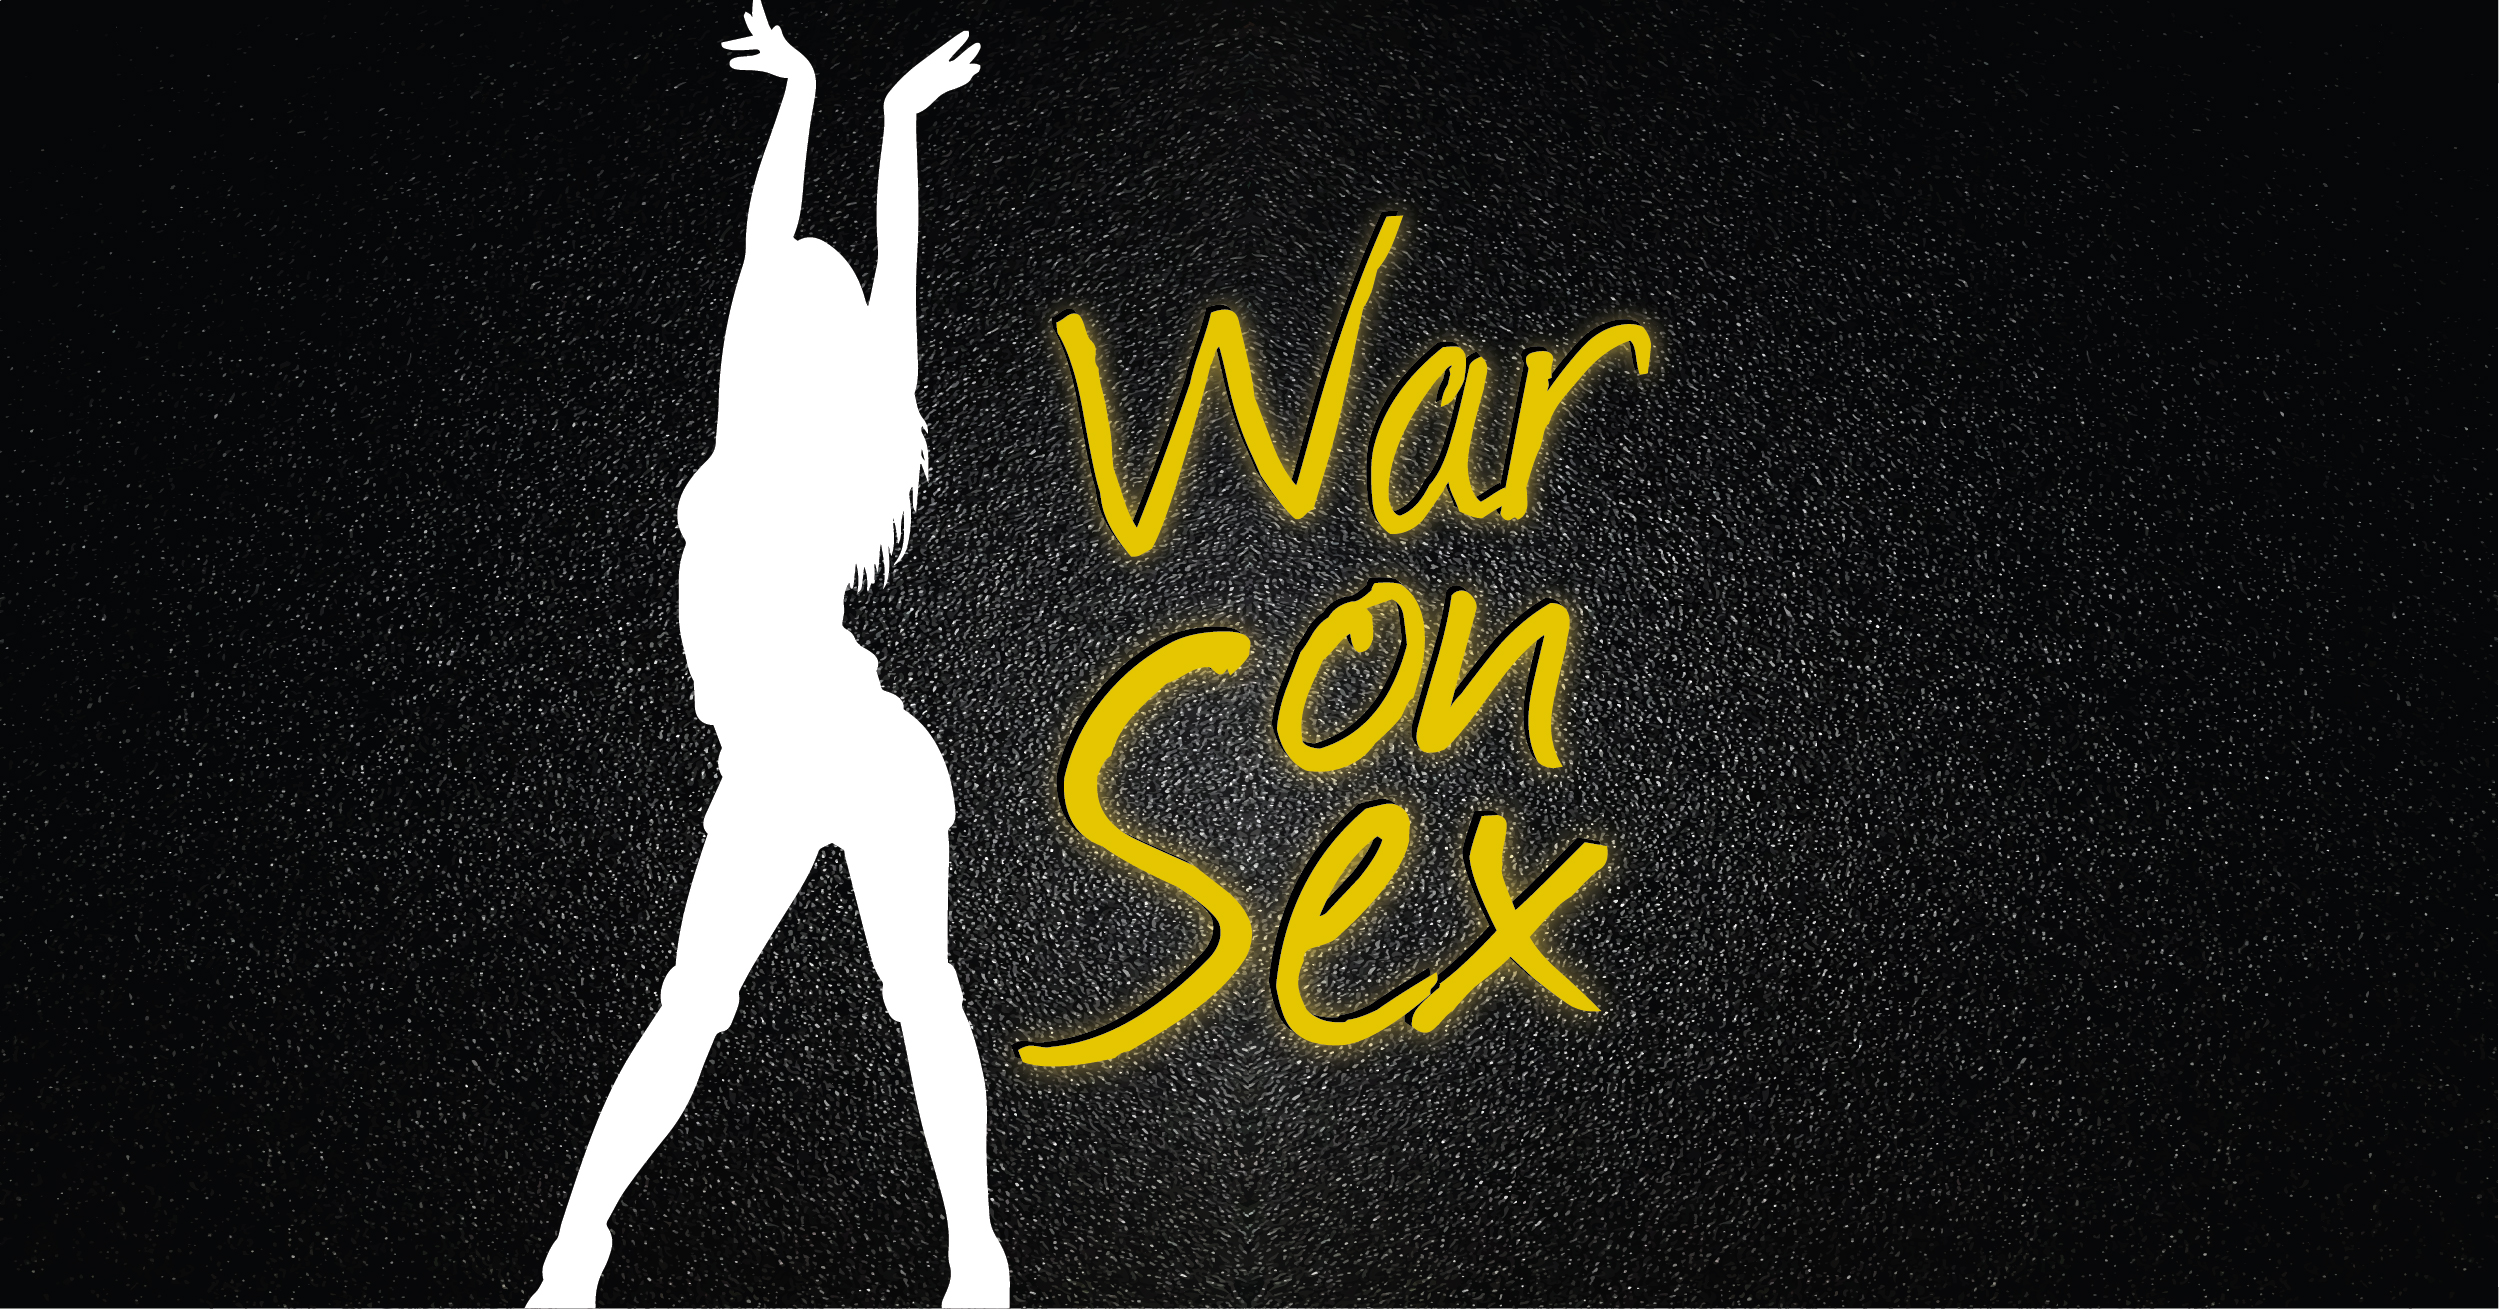 Telugu Black Mail Sexs - Why Libertarians Should Care About the War On Sex | Libertarian Party